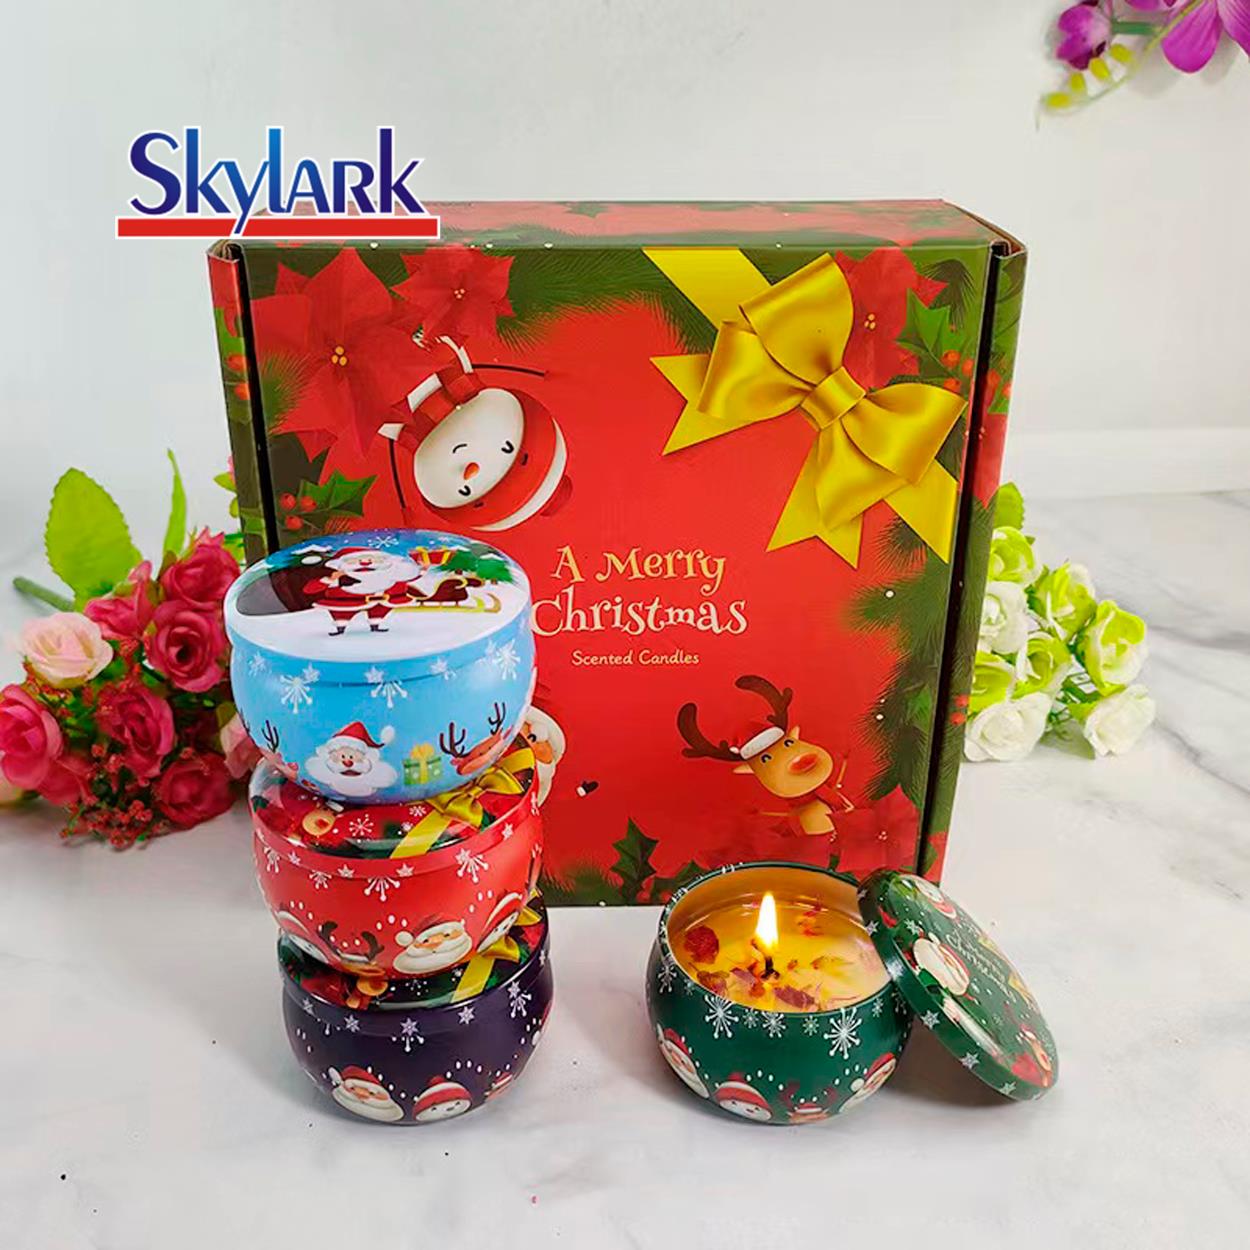 Professional Christmas Scented Candles Gift Set With Excellent Performance